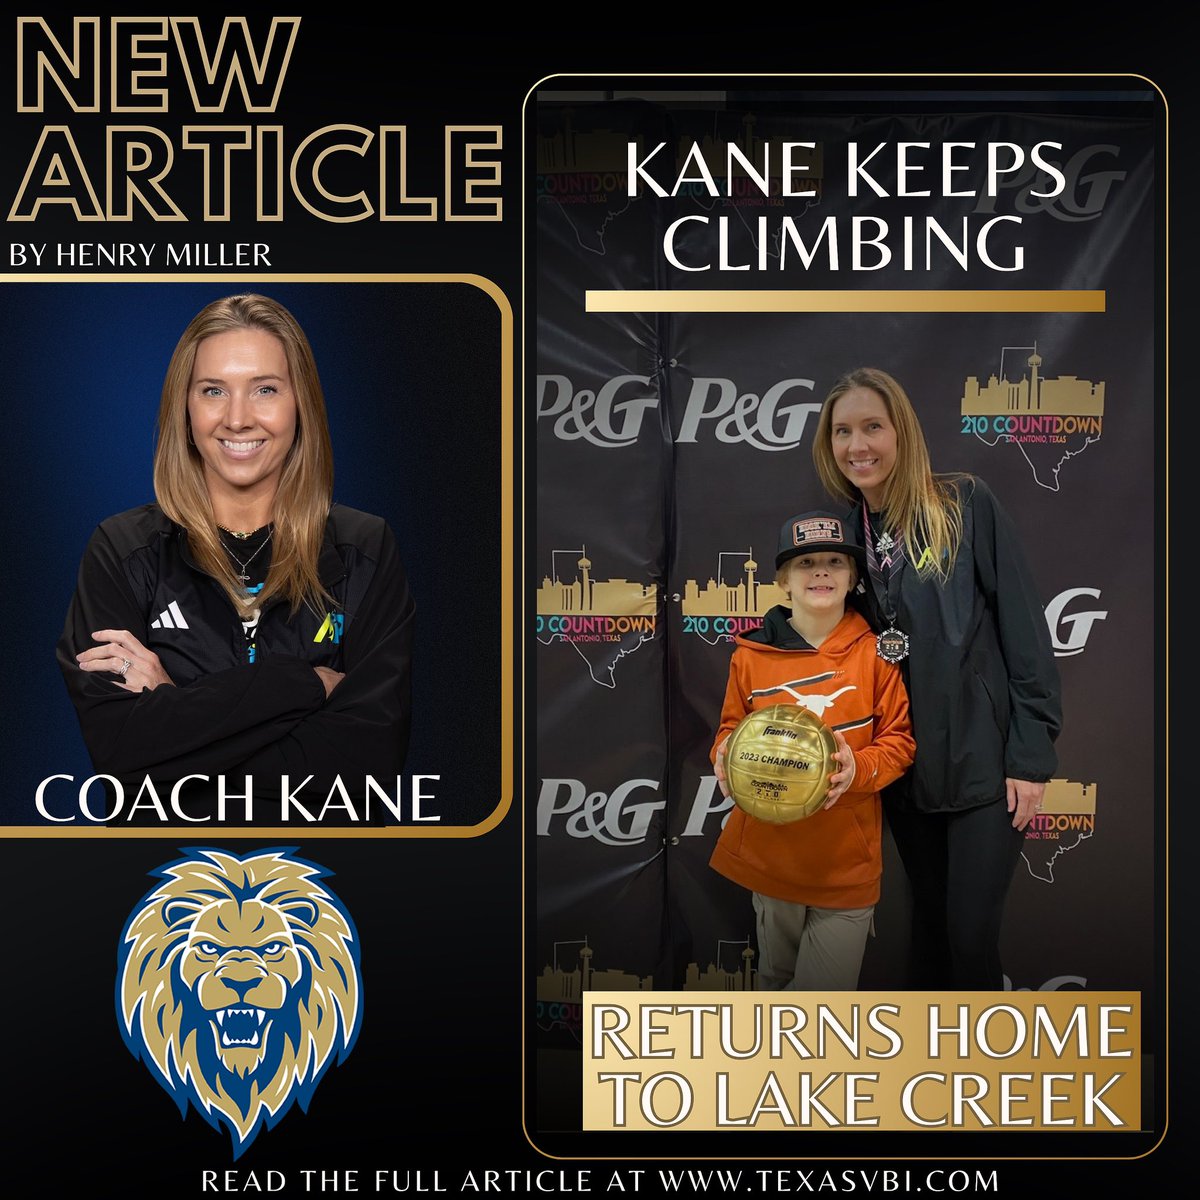 Another great article posted for TVI Subscribers! “Kane keeps climbing, returns home to Lake Creek”. By Henry Miller. Not a Member? (texasvbi.com membership). All “NEW members will come with a complementary ATHLETE FOUNDRY lifetime Membership!!!!